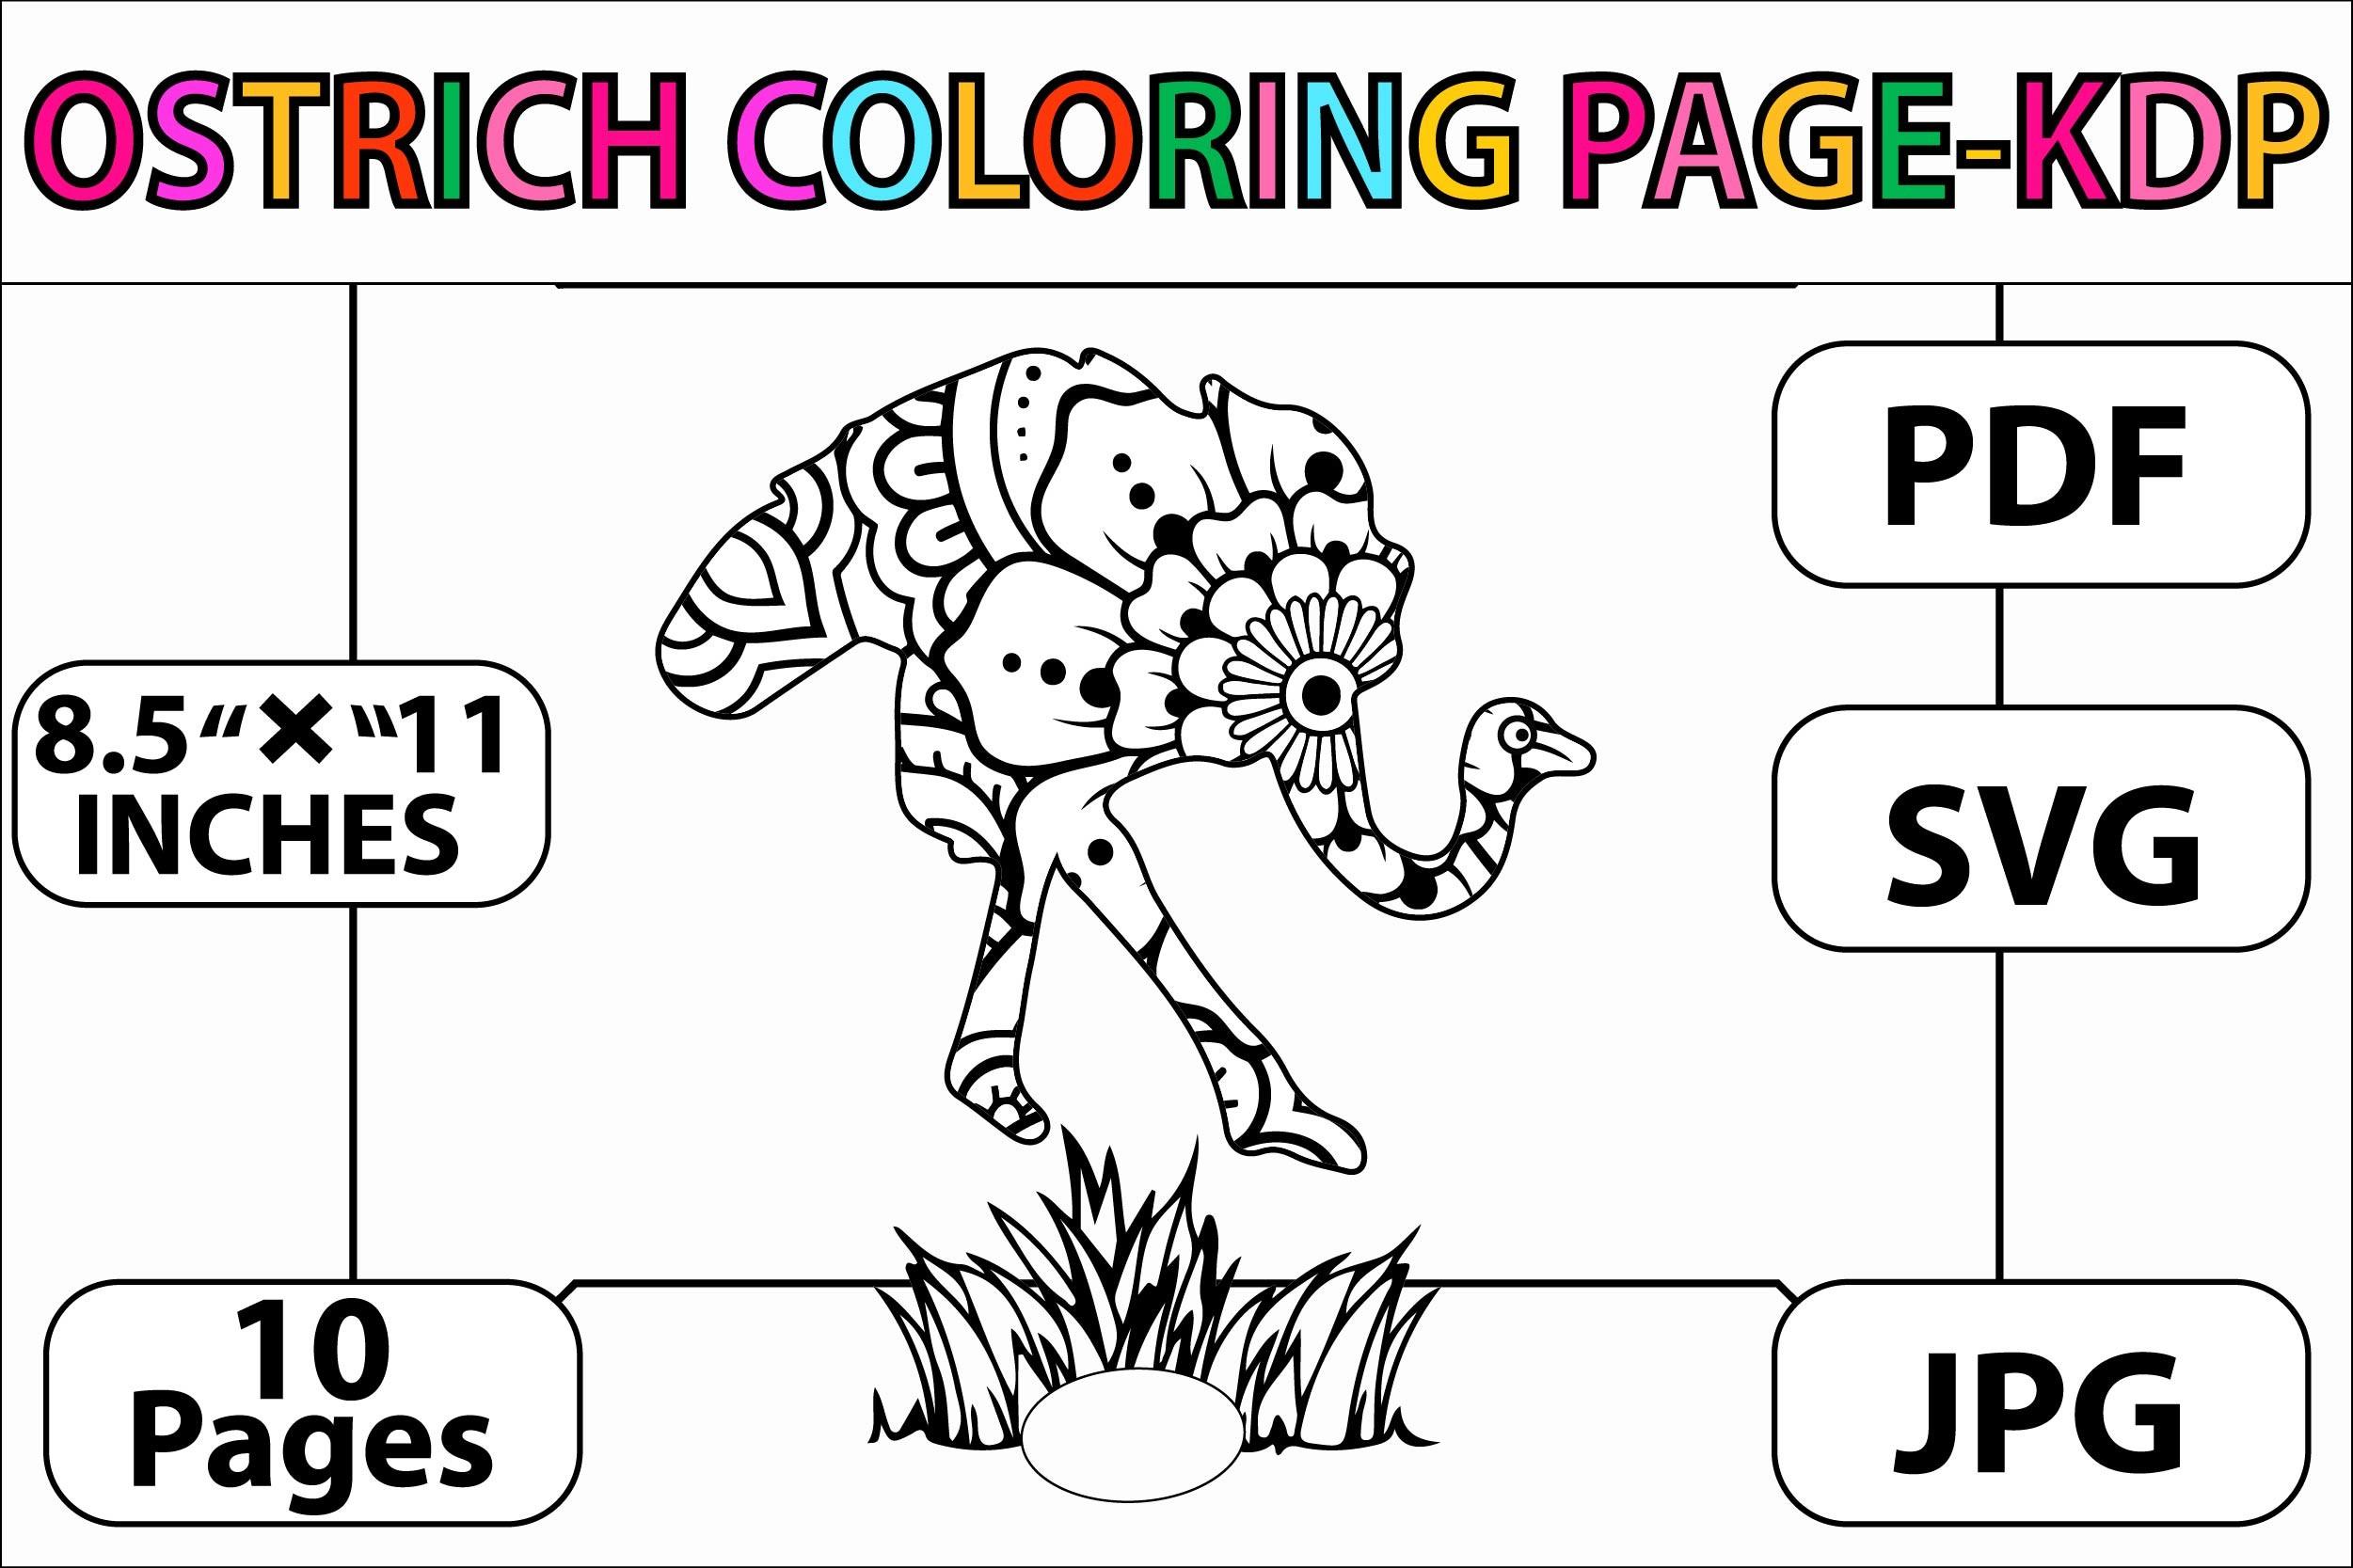 Ostrich Coloring Page - KDP